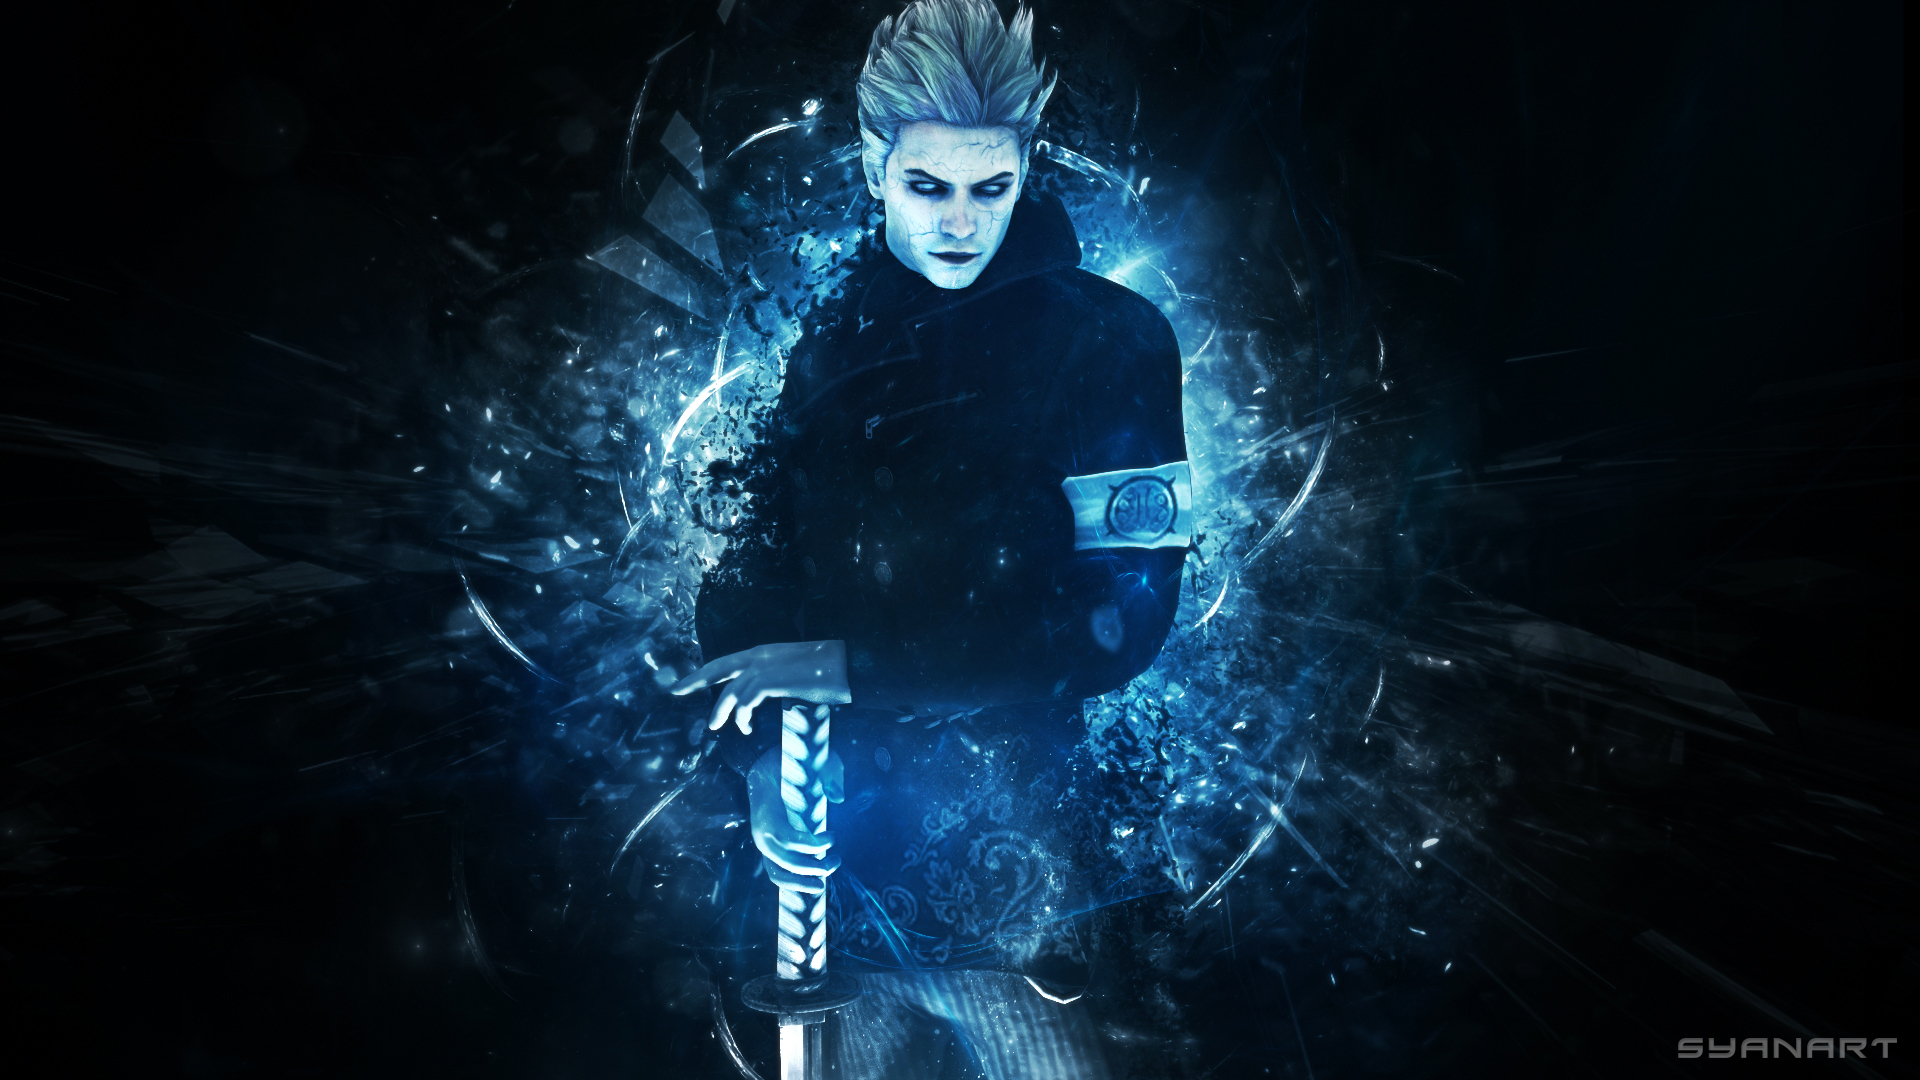 download vergil devil may cry for free